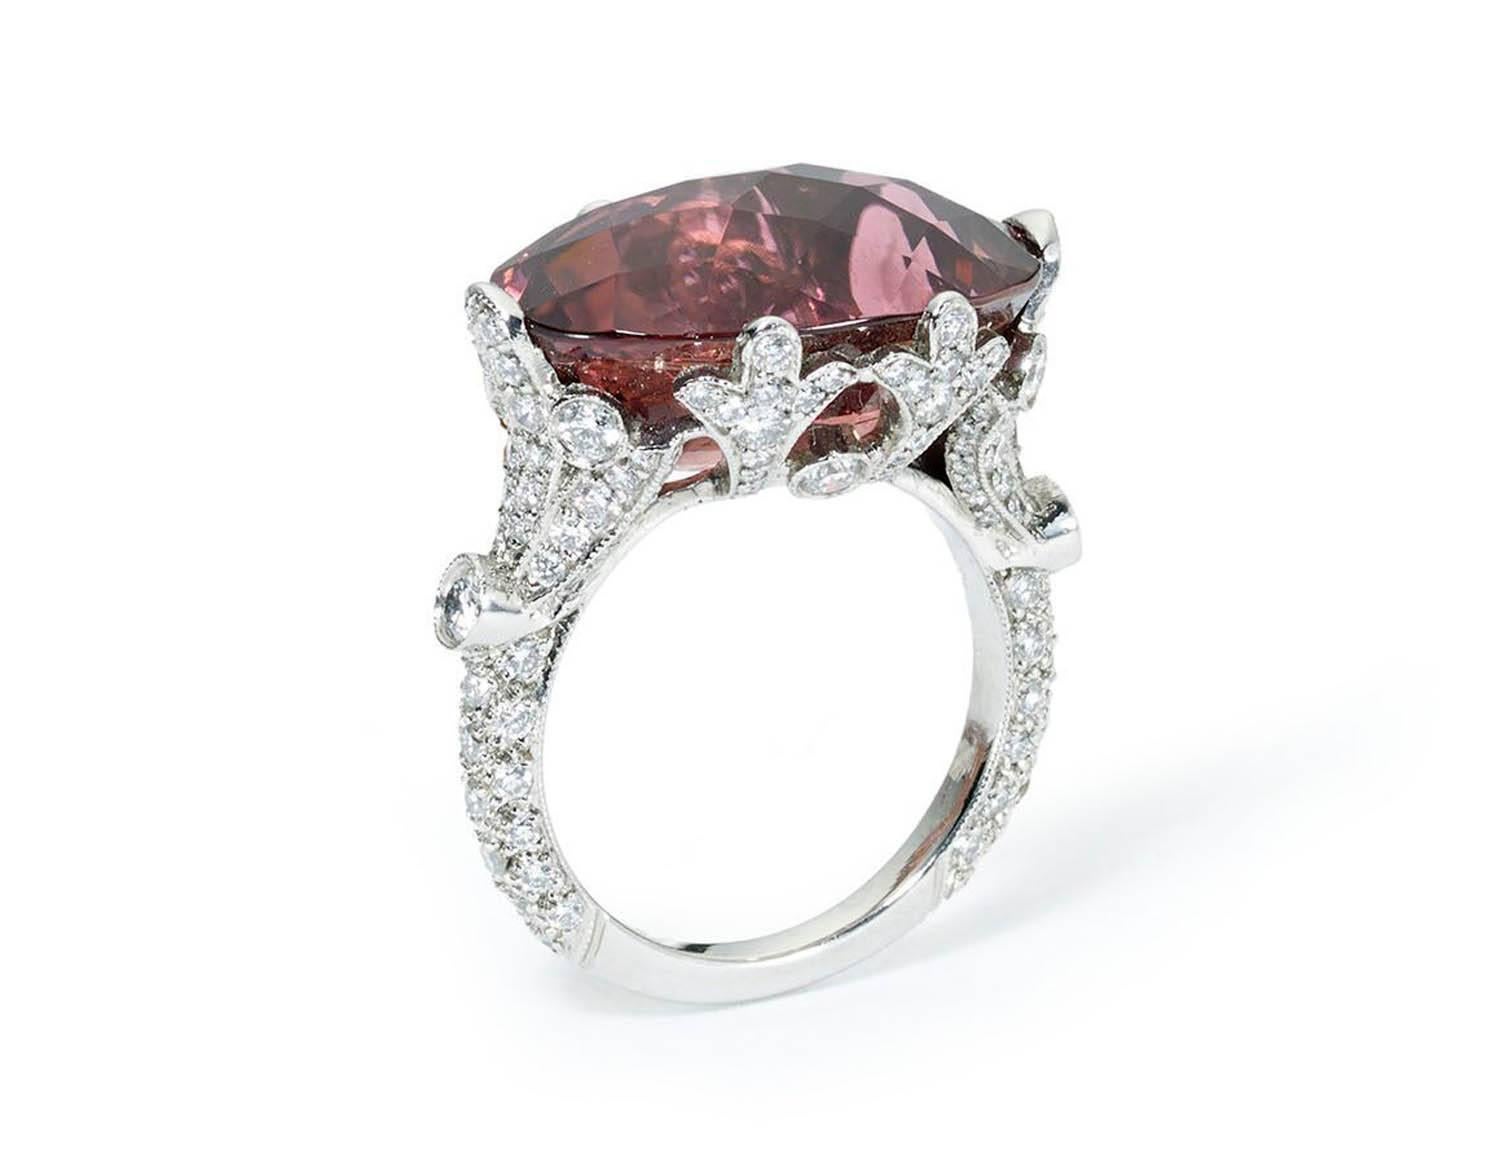 A tourmaline and diamond ring, set with a pineapple-cut pink tourmaline, weighing 13.95ct, with diamond set shank, fleur-de-lis settings and trefoil shoulders, with an estimated total diamond weight of 1.26ct, mounted in platinum.

UK size L / USA 5